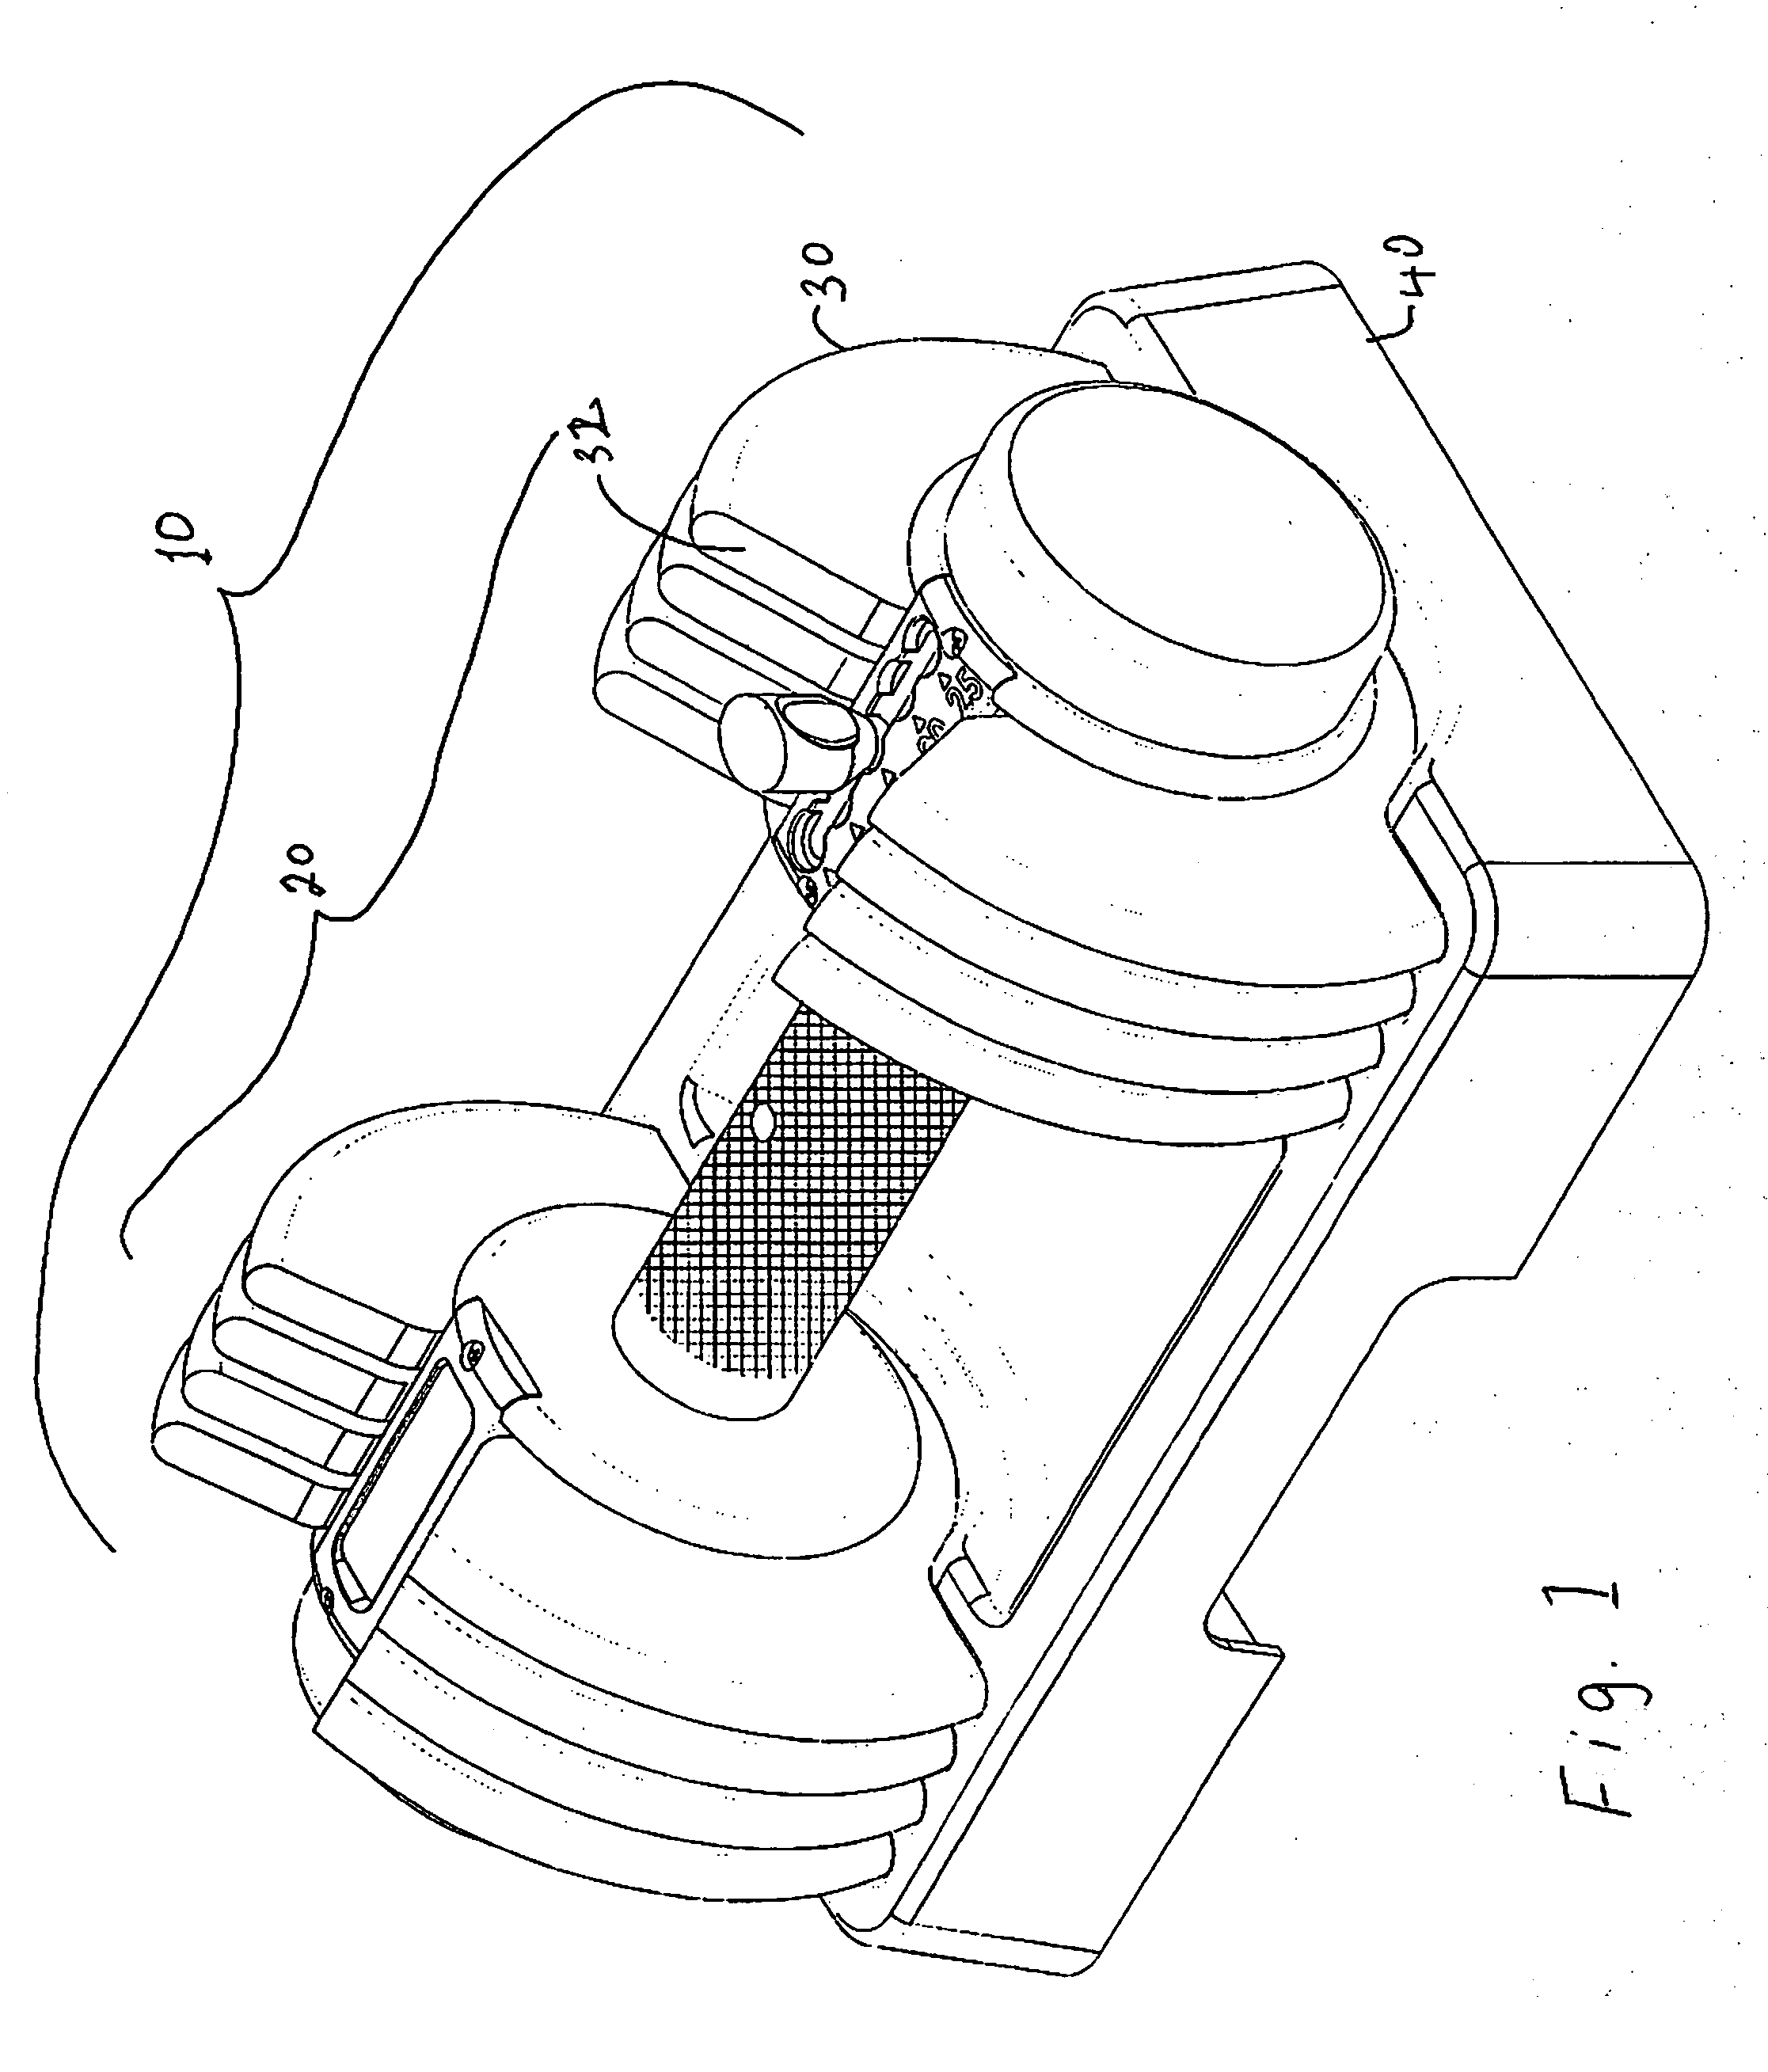 Dumbbell glide apparatus with weight adjusting key